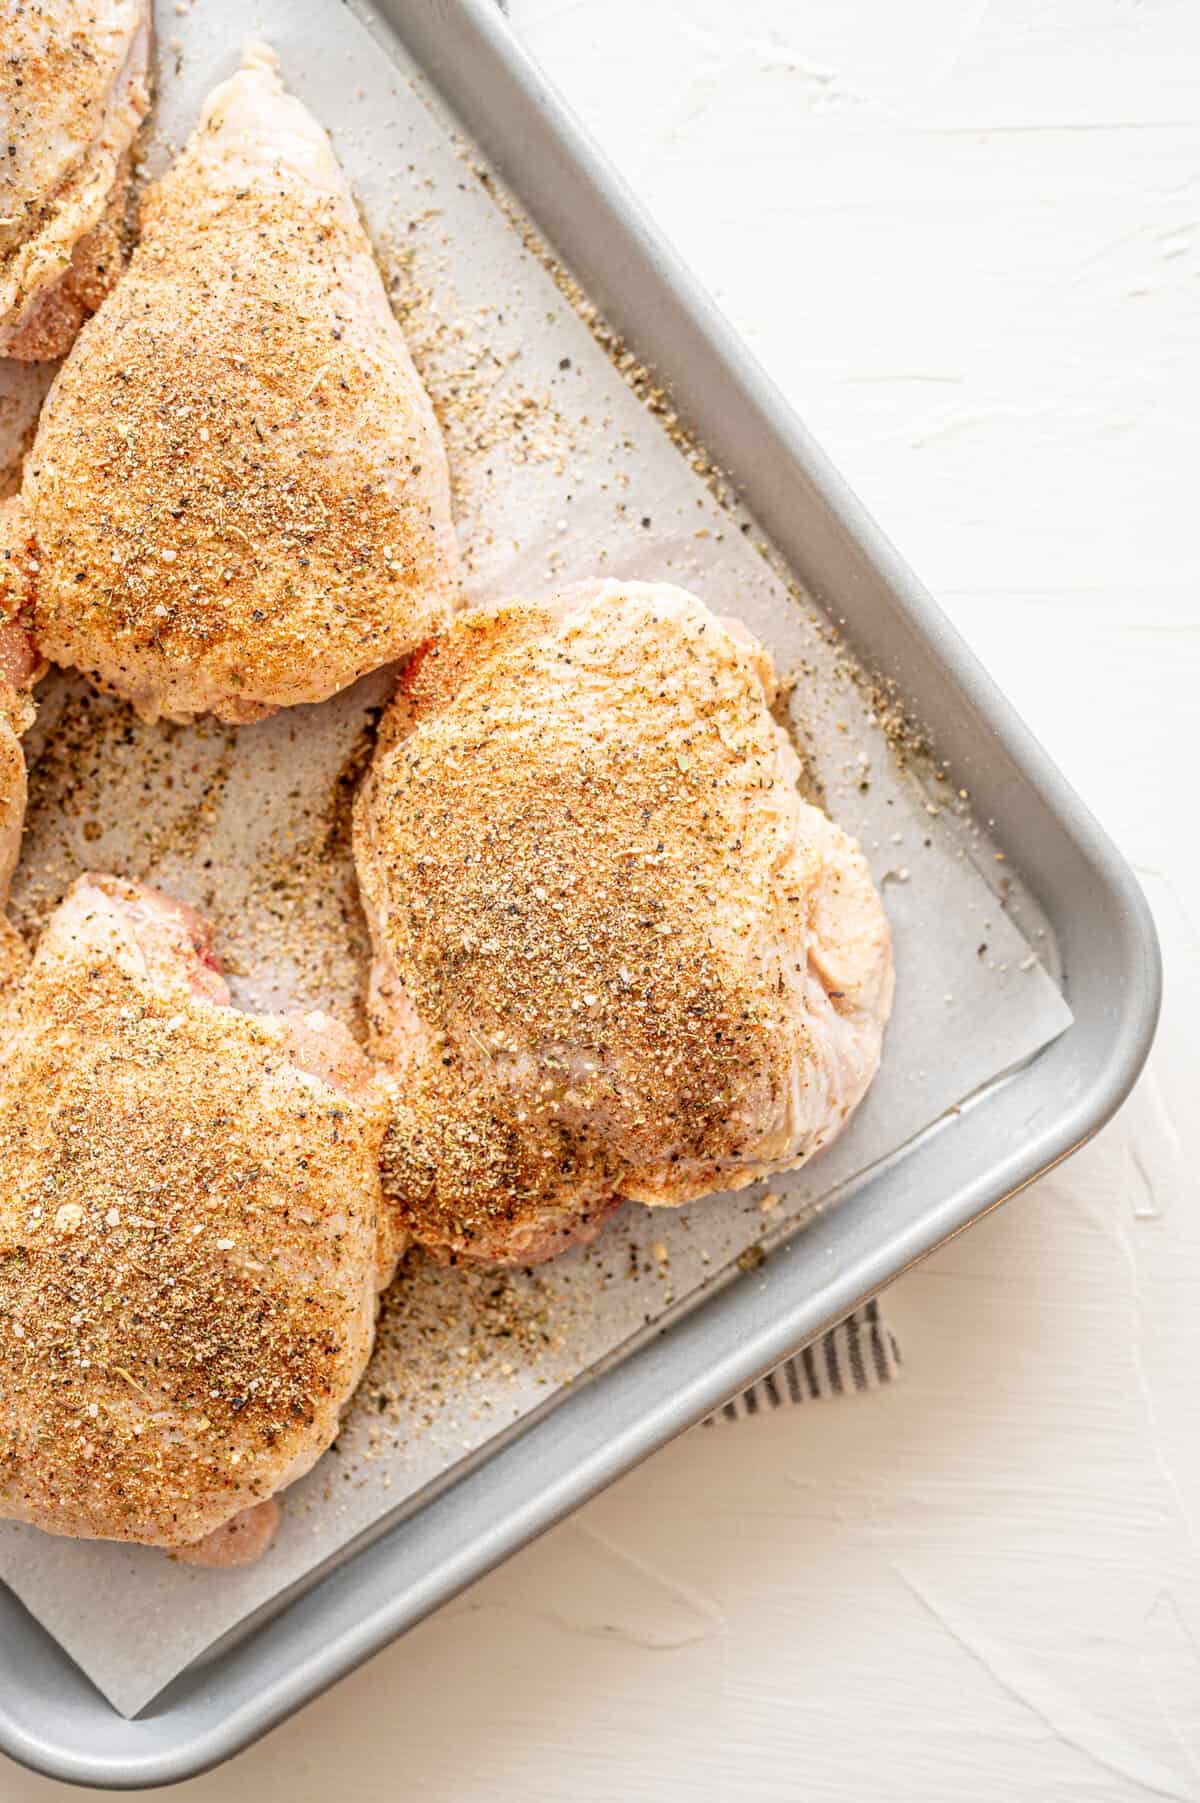 Seasoned chicken thighs on a baking sheet lined with parchment paper ready for the oven.